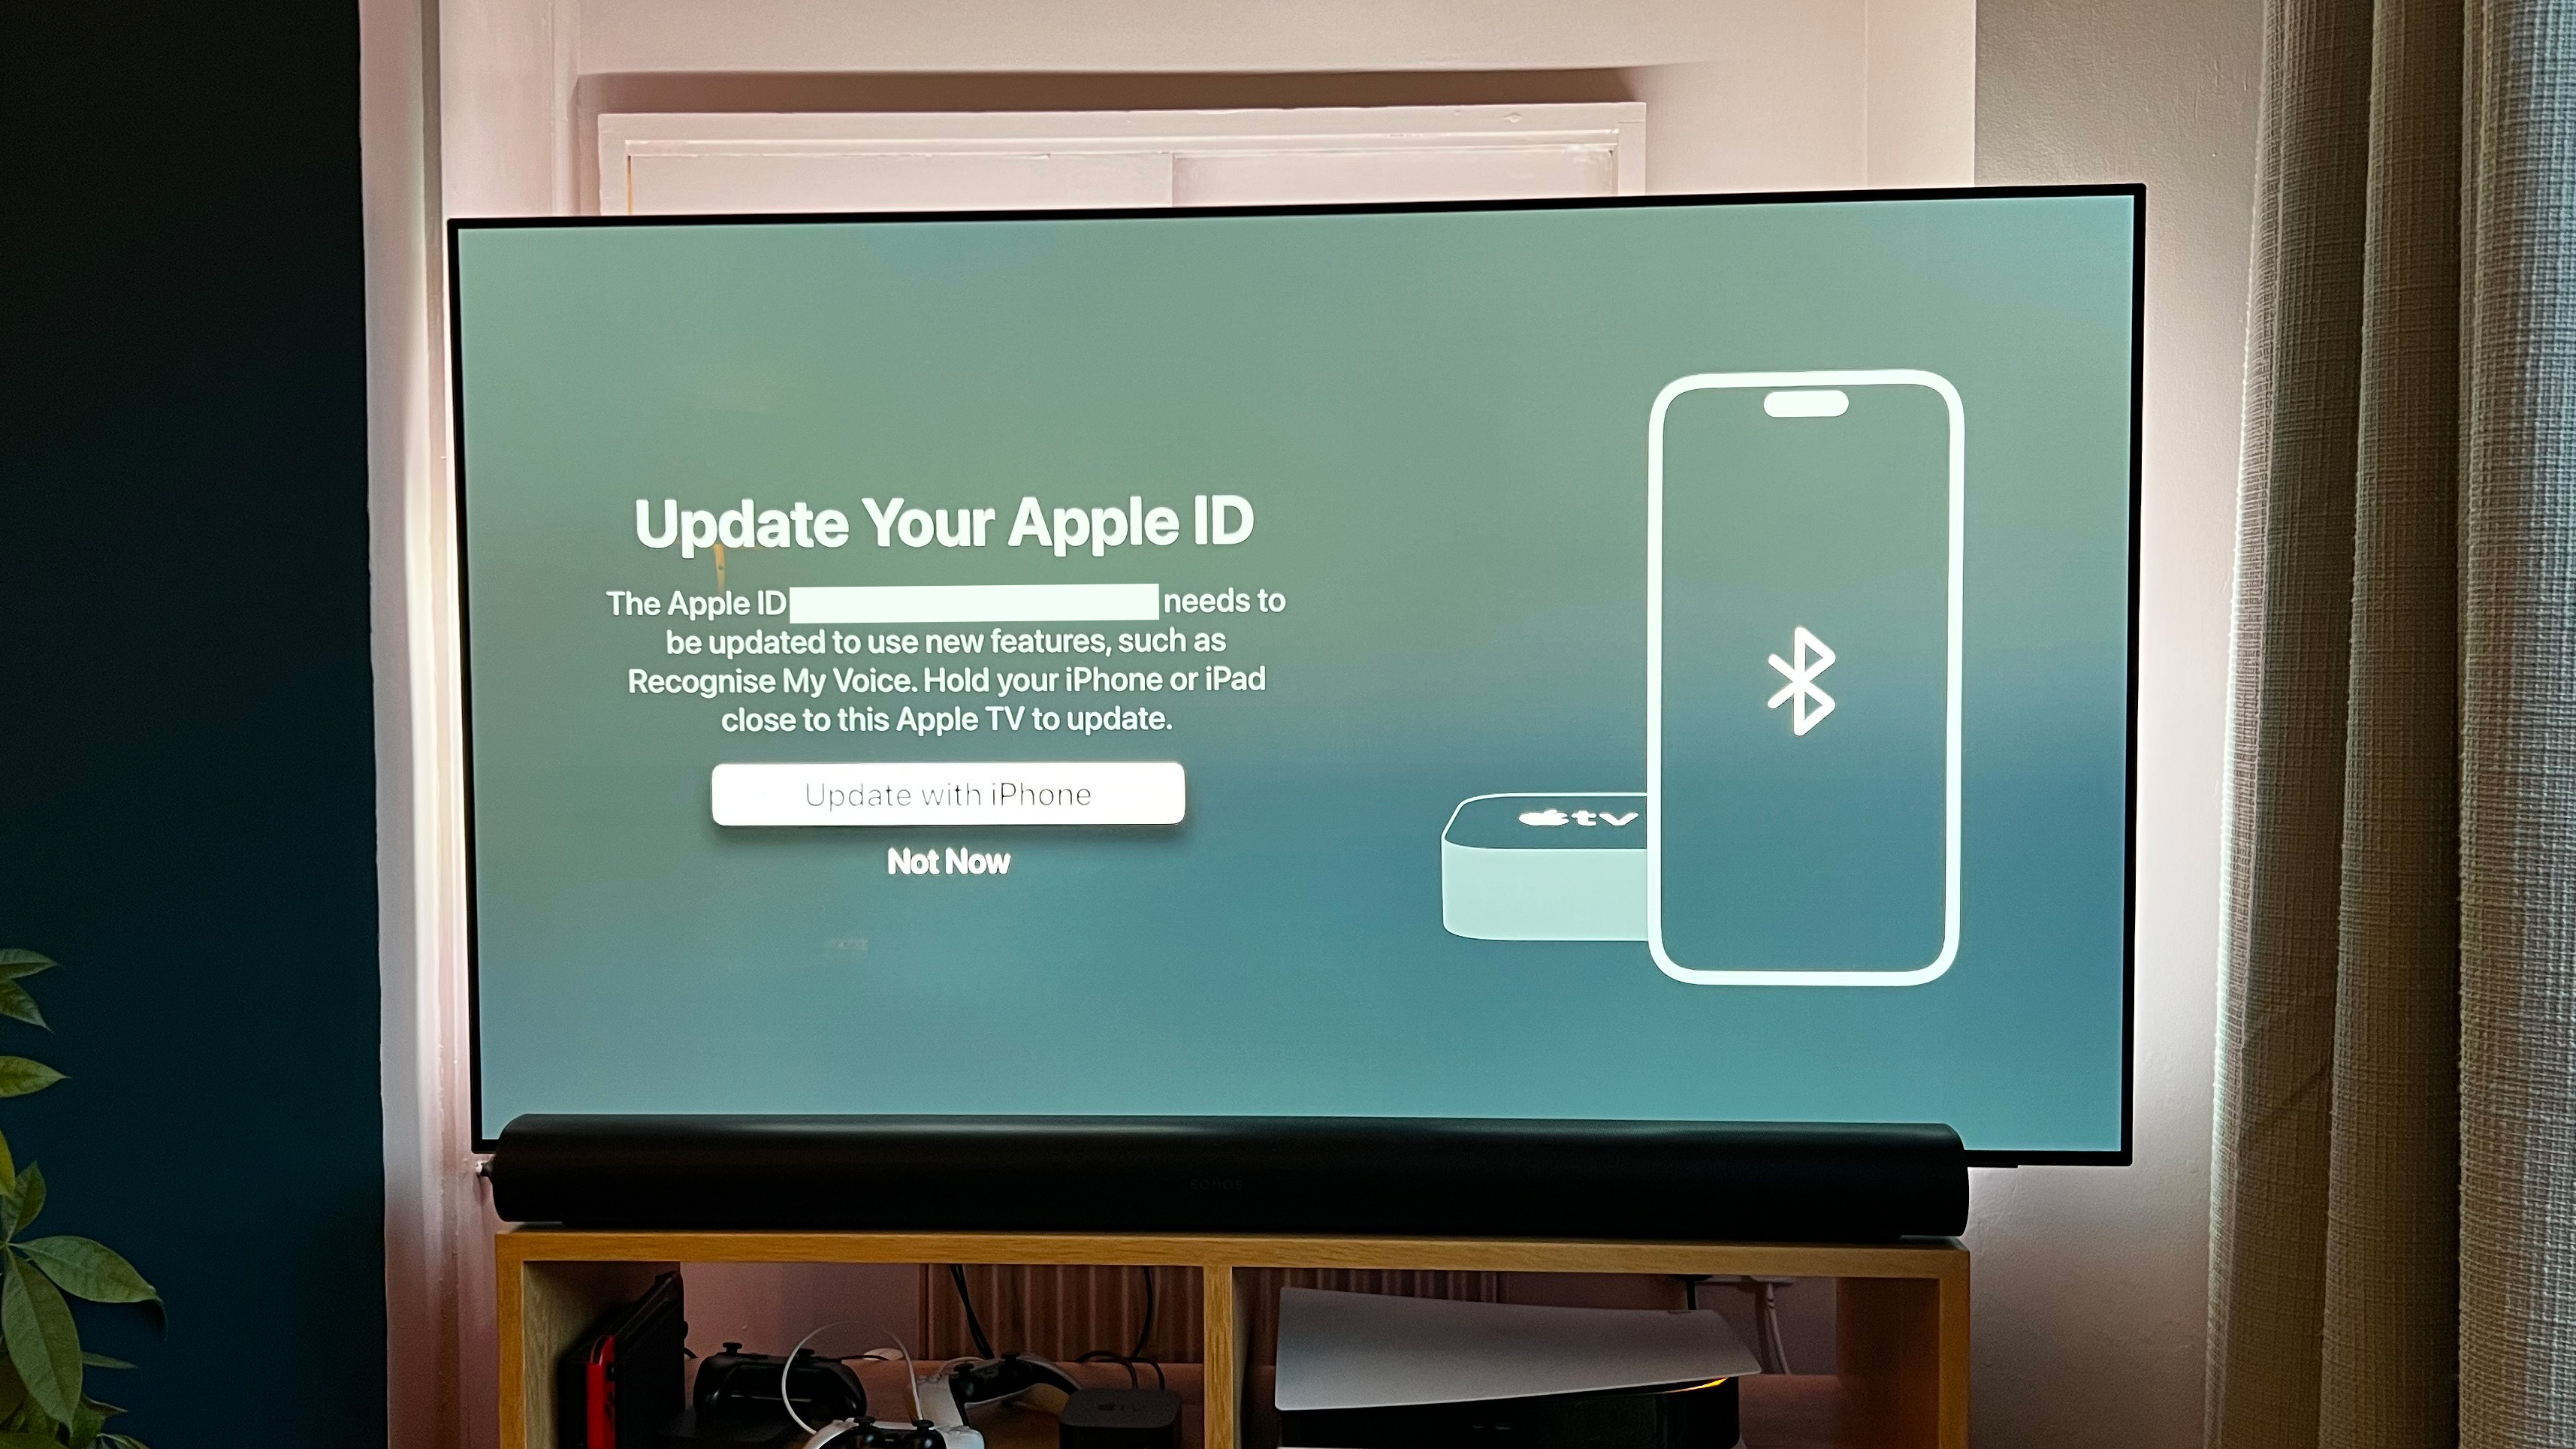 Can I use Apple TV 4k without iPhone?